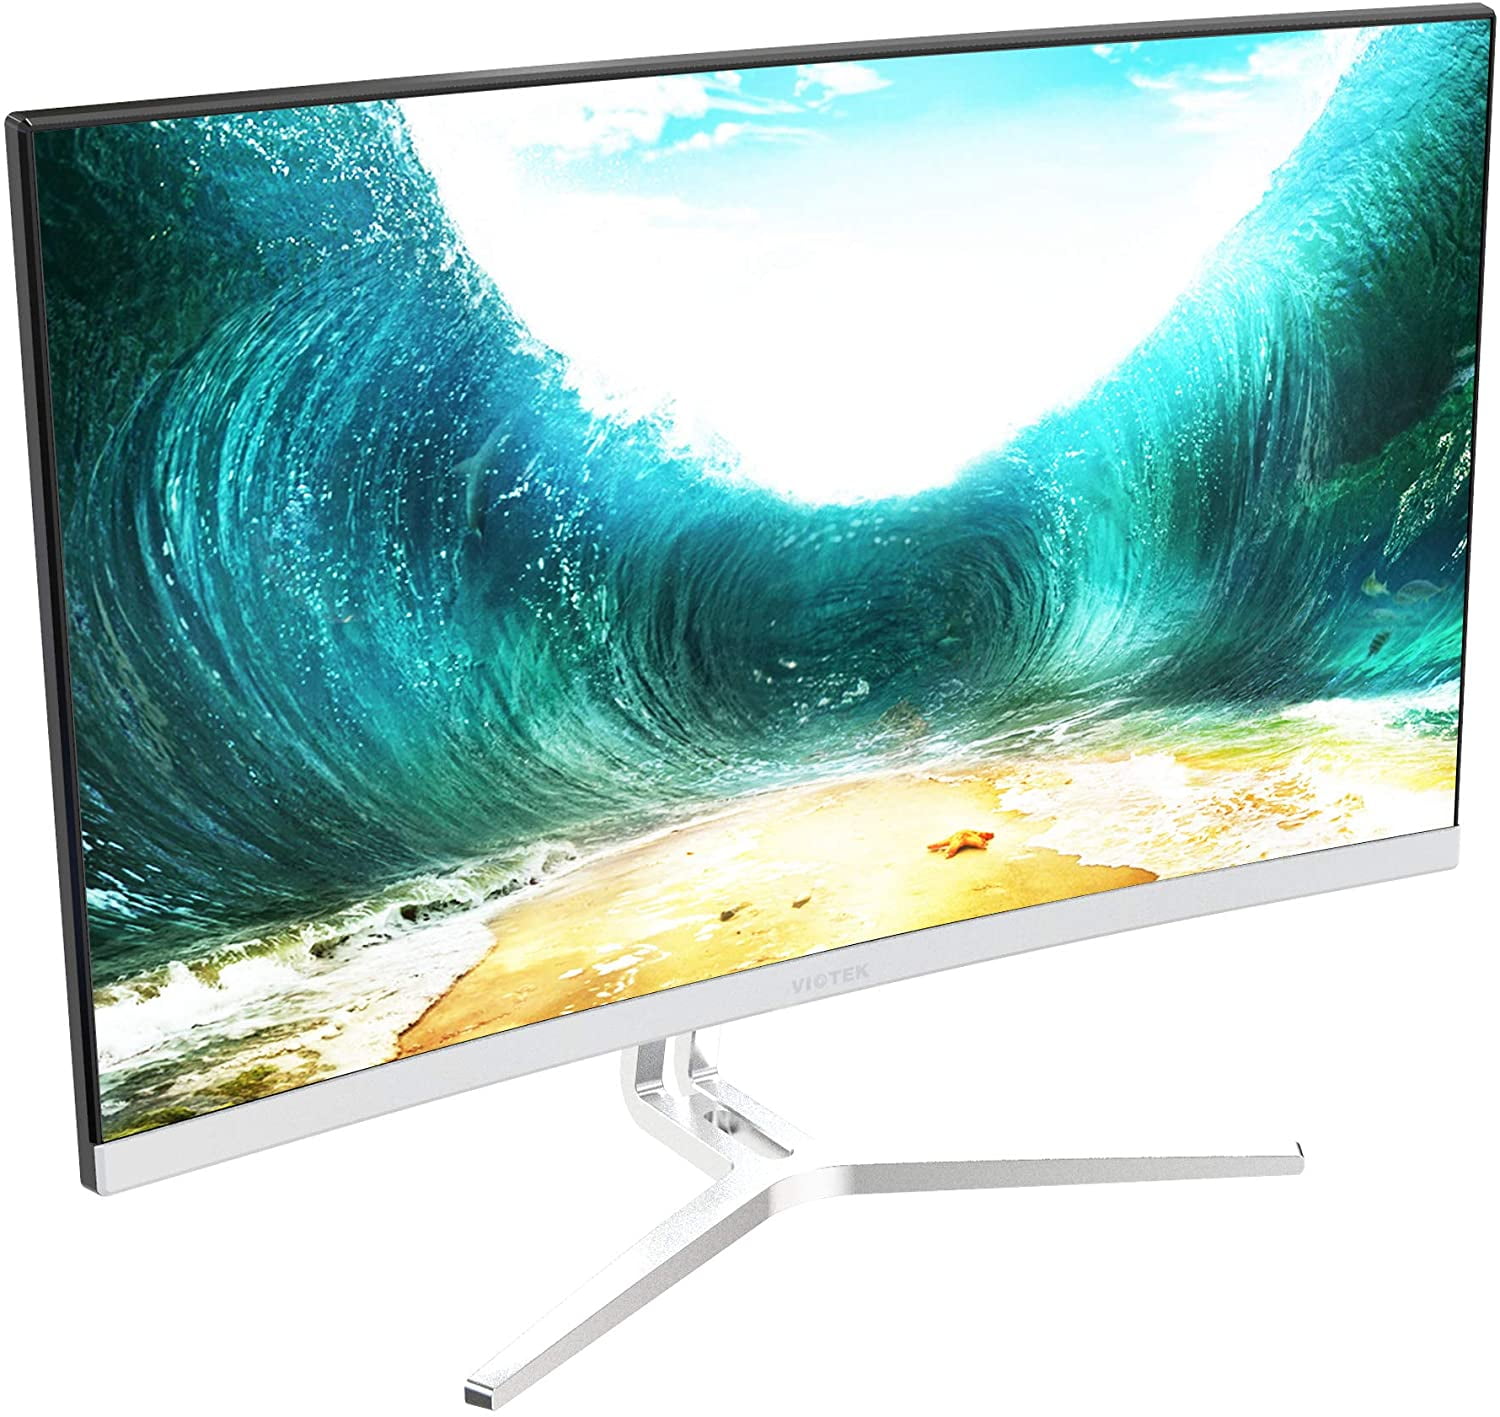 VIOTEK NB24CW 24-Inch LED Curved Monitor with Speakers Bezel-Less Display 1080P 